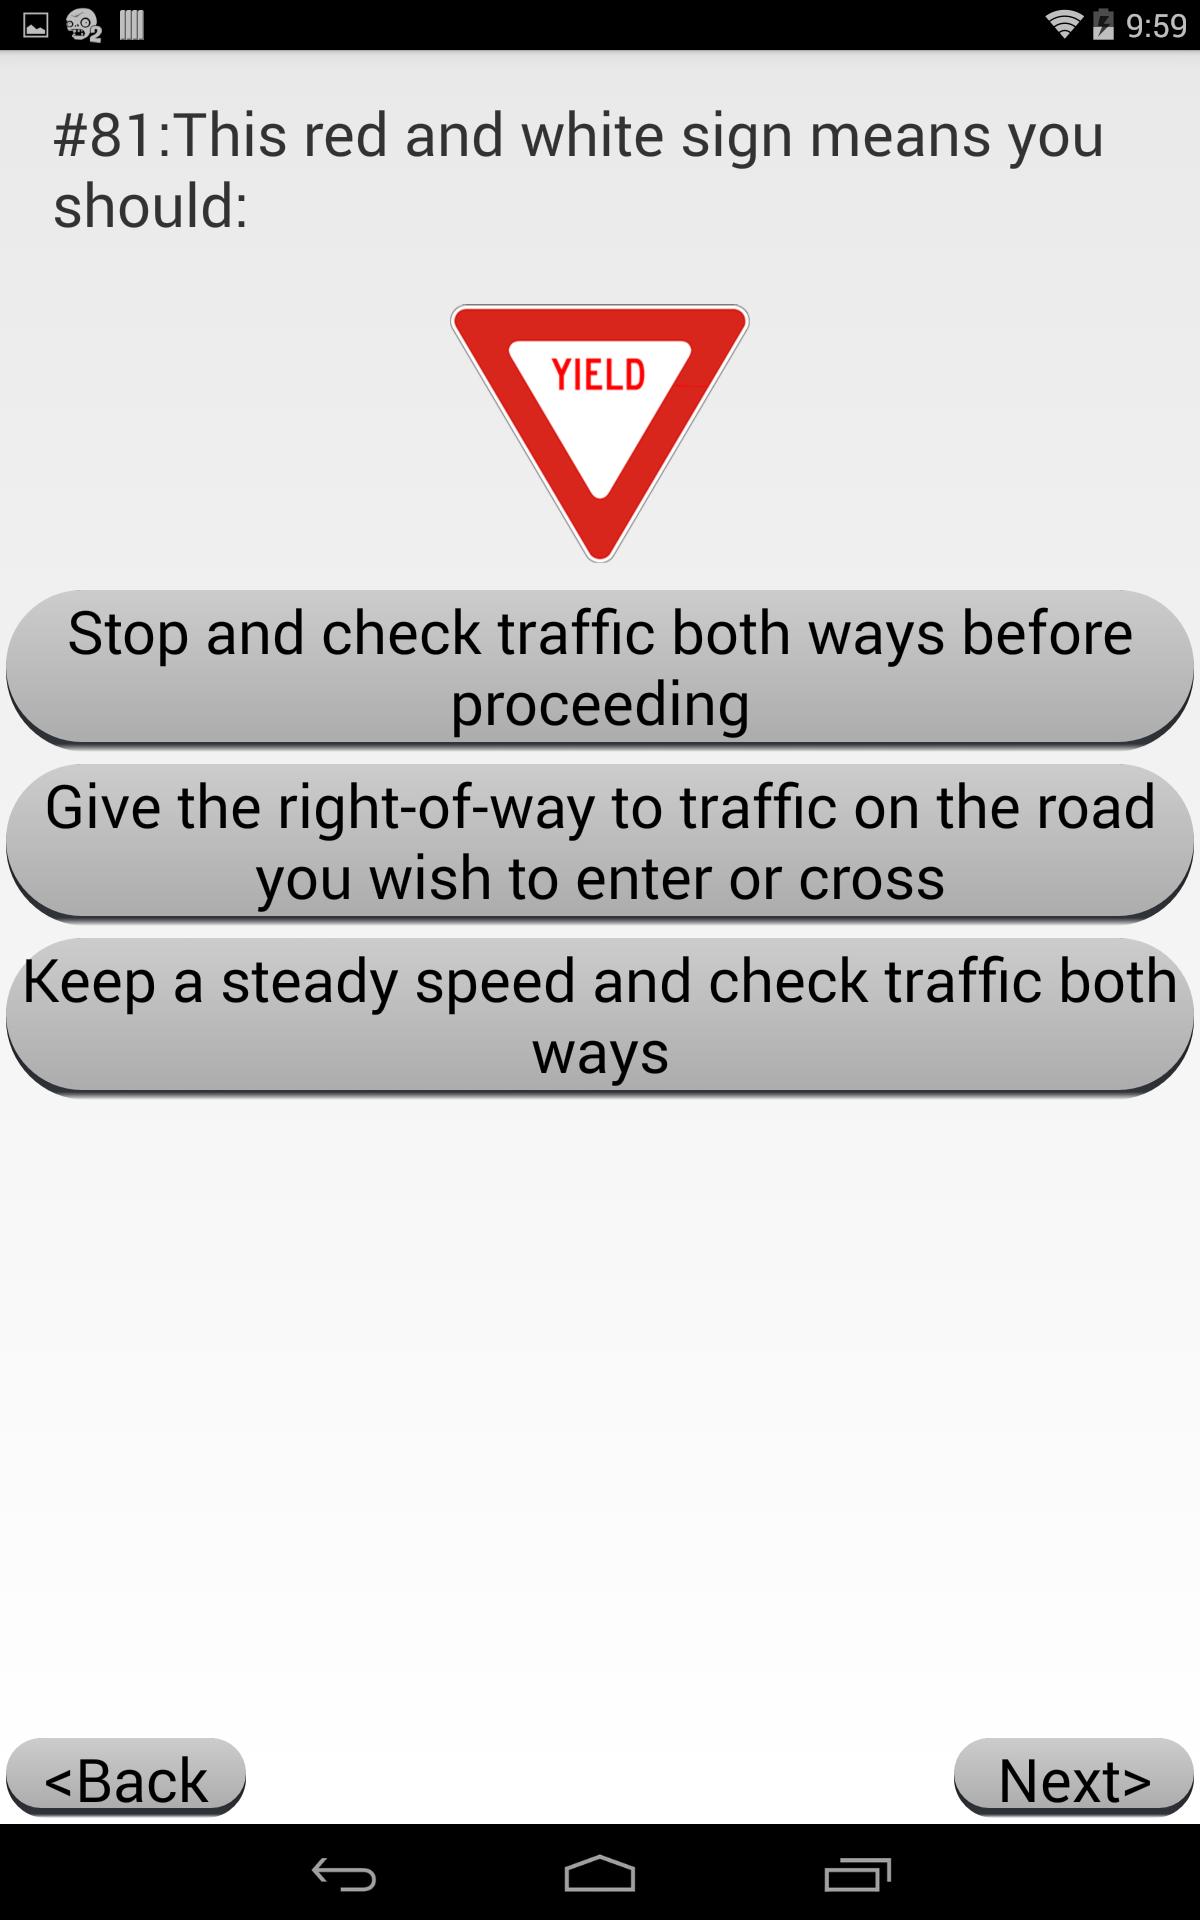 California DMV Driving Permit Test 2019 for Android - APK ...